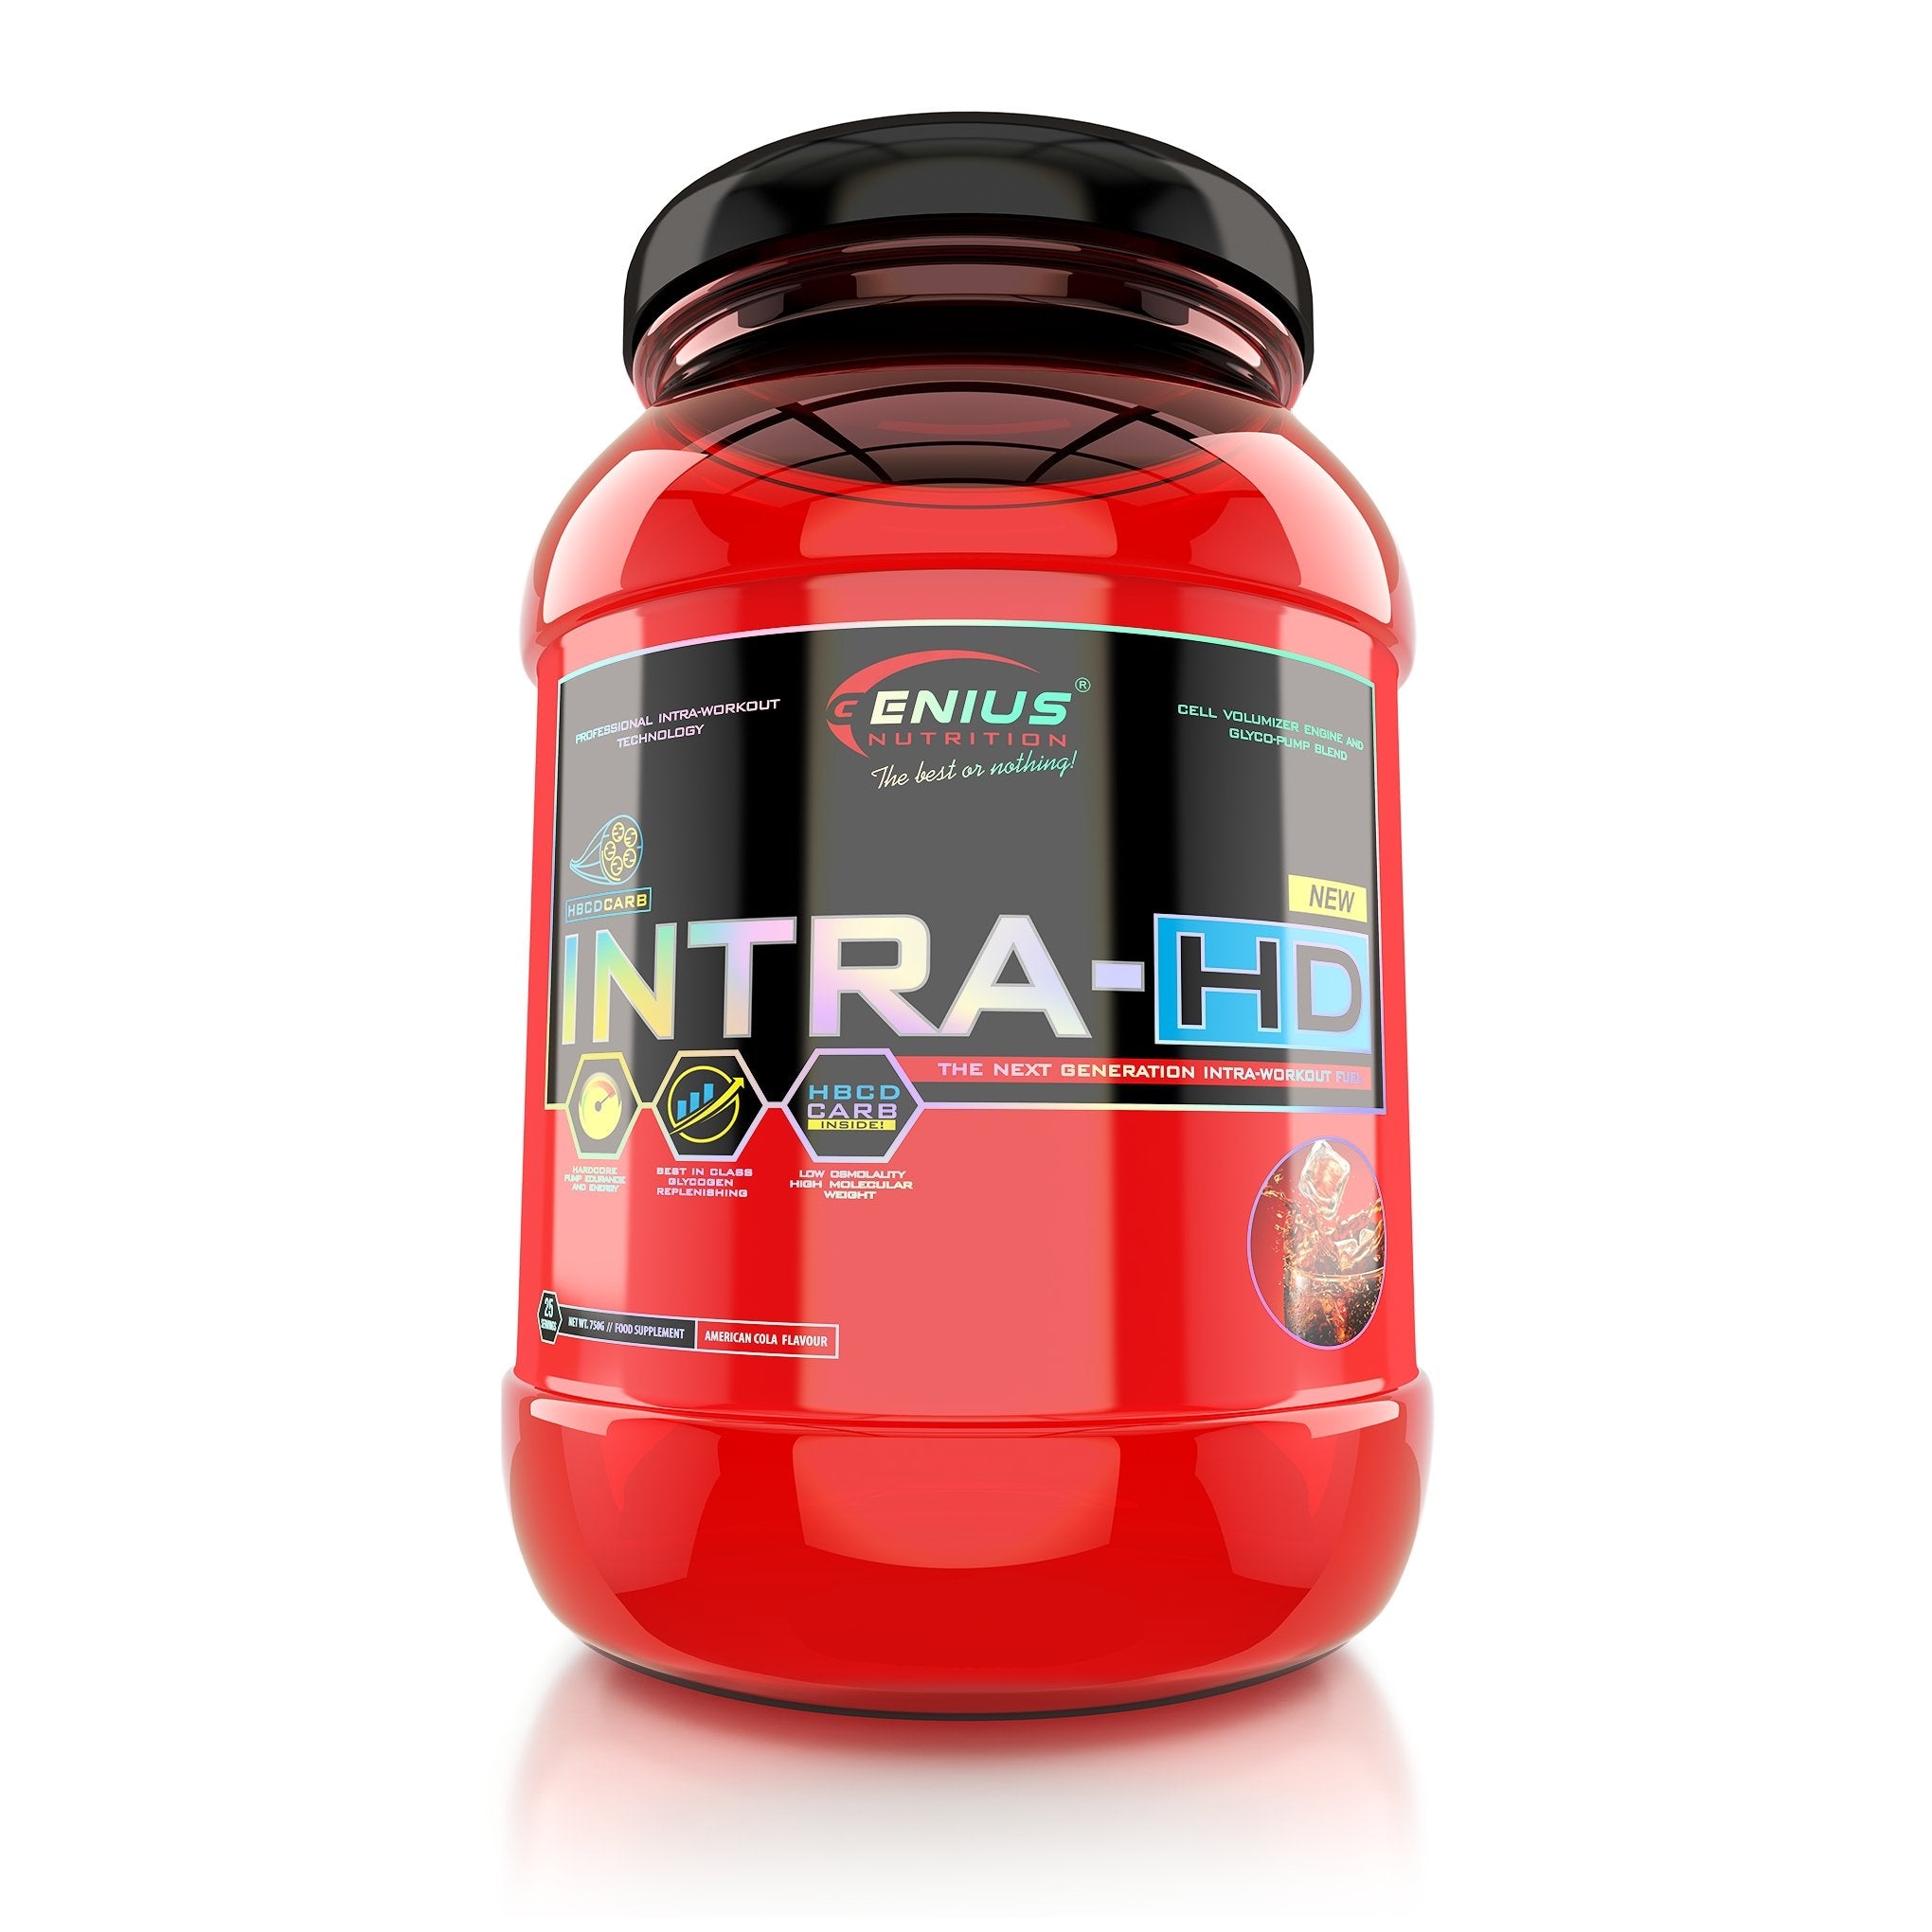 in cat timp intra banii prin transfer bancar INTRA-HD 750g, pudra, Genius Nutrition, Supliment intra-workout - Nutriland